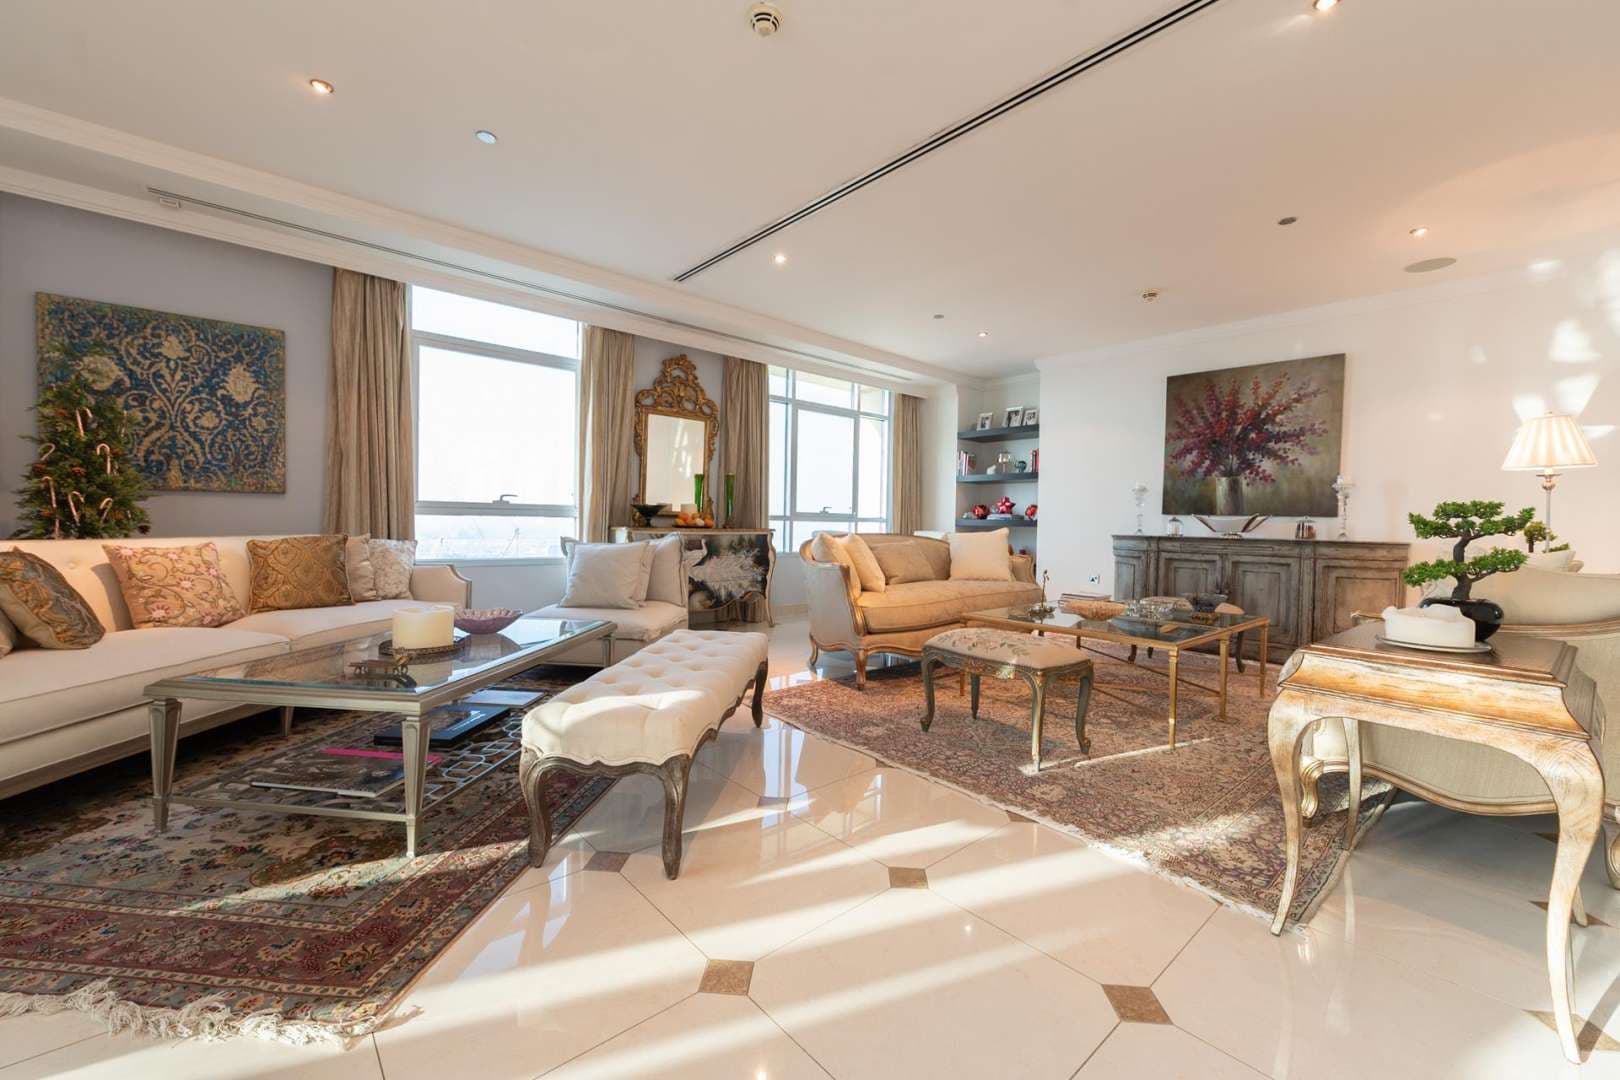 5 Bedroom Penthouse For Sale Emirates Crown Lp05273 1a6176434cf63800.jpg